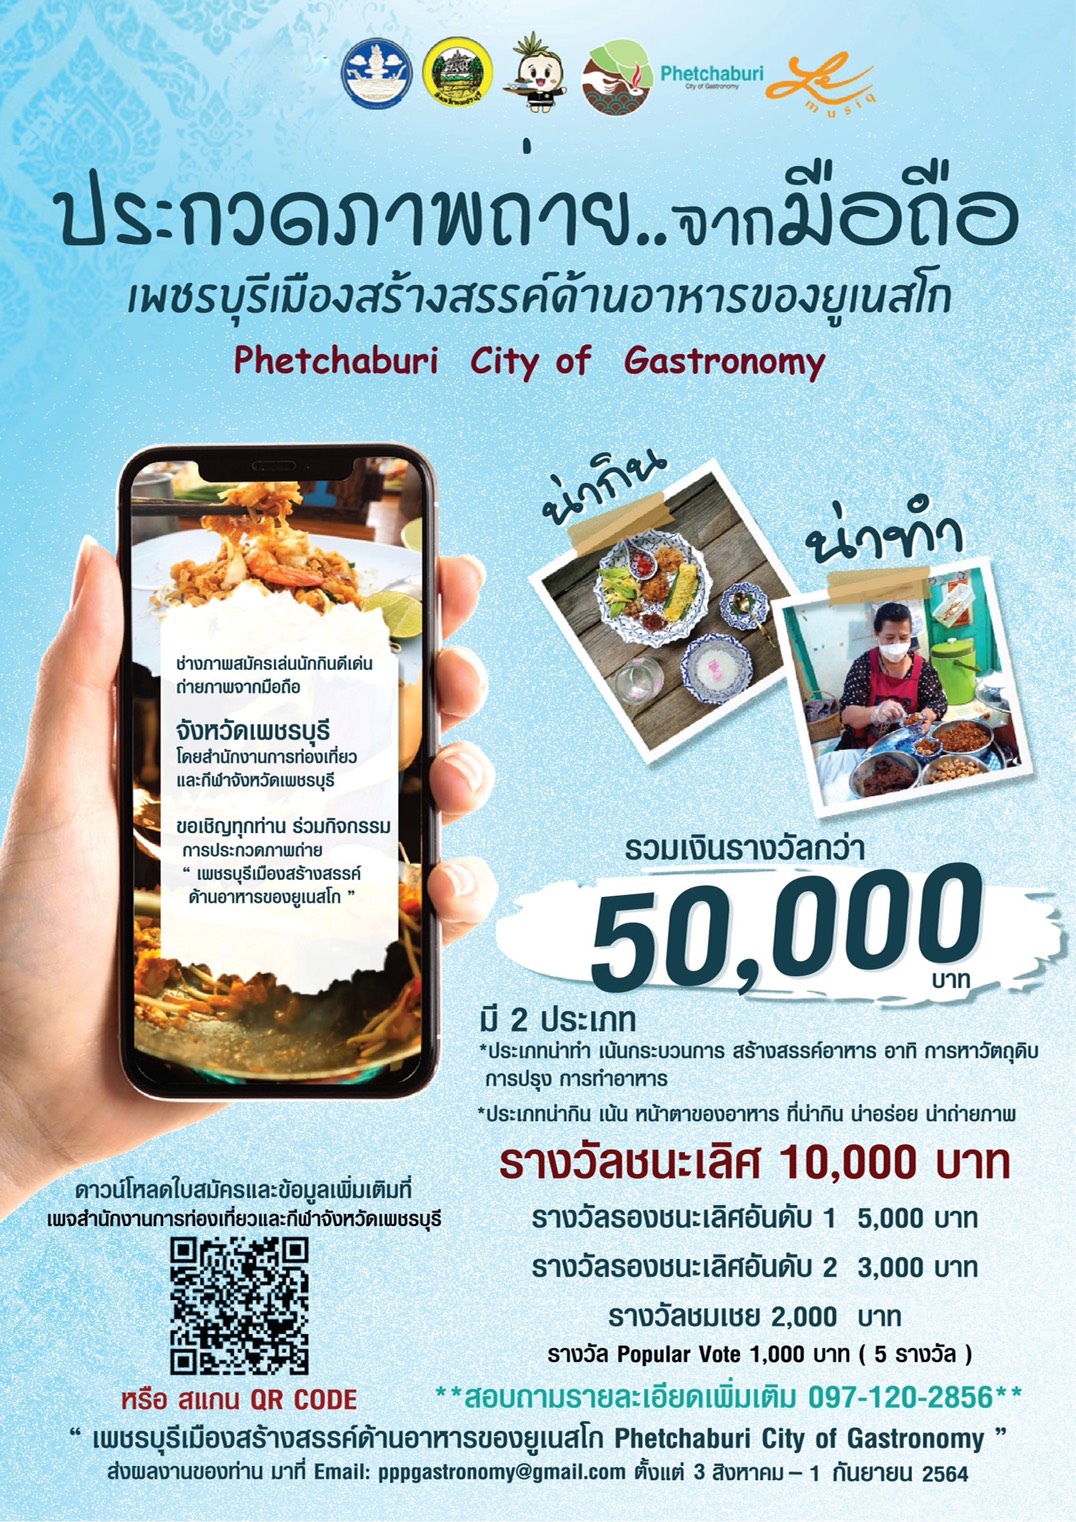 Invitation to a photo contest...from a mobile phone  "Phetchaburi city of gastronomy"